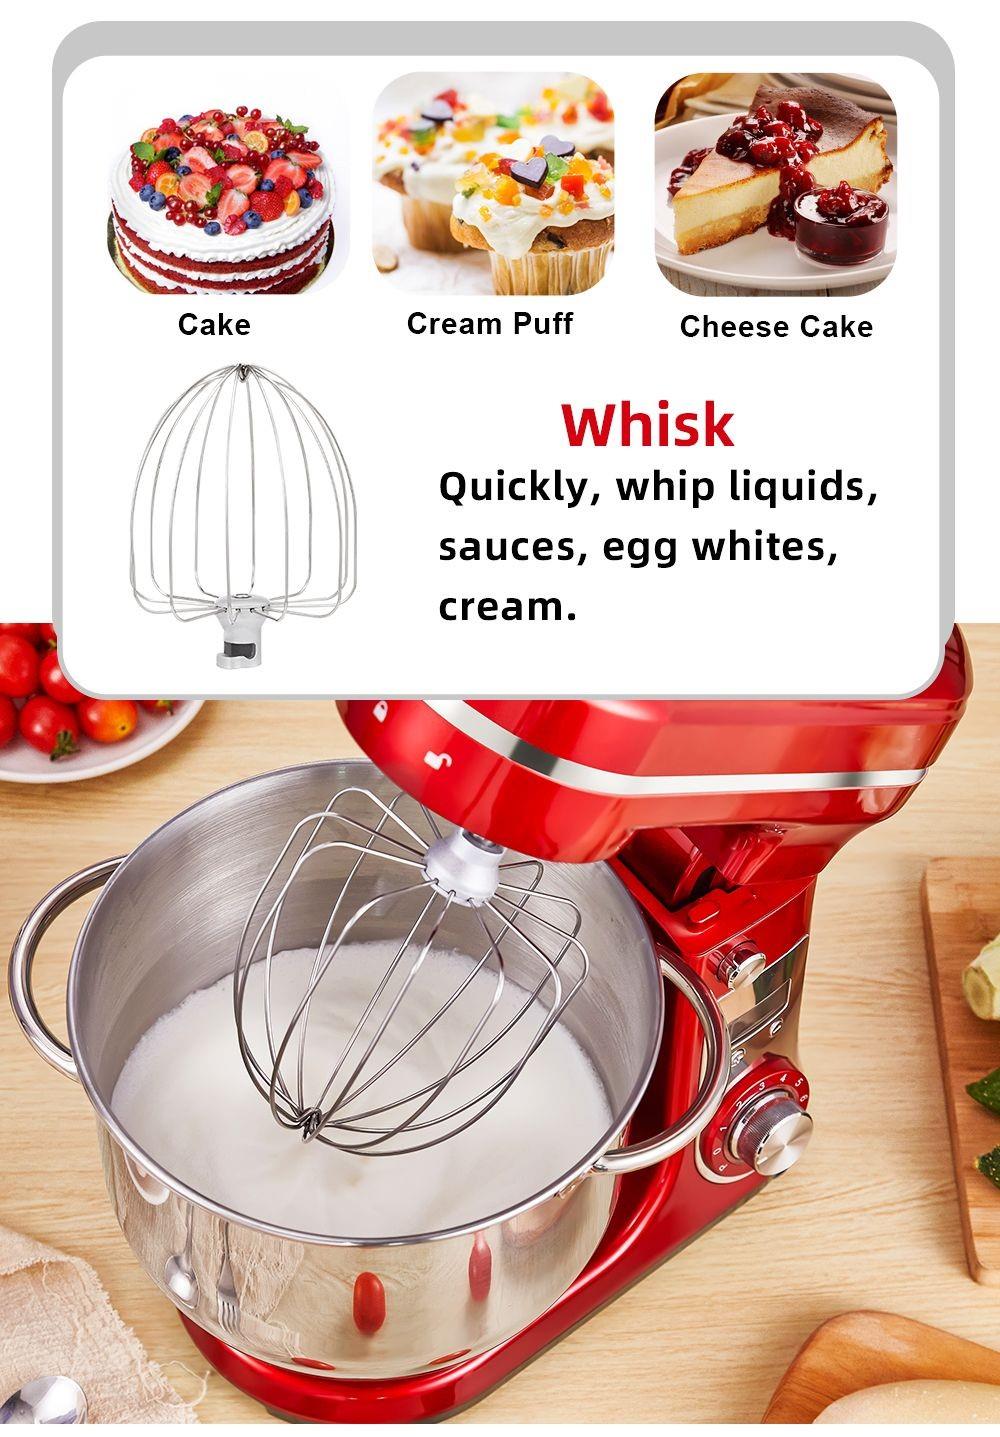 BioloMix BM601 1200W Kitchen Food Stand Mixer, Cream Egg Whisk, Cake Dough Kneader, 6L Capacity, Stainless Steel Bowl - Red